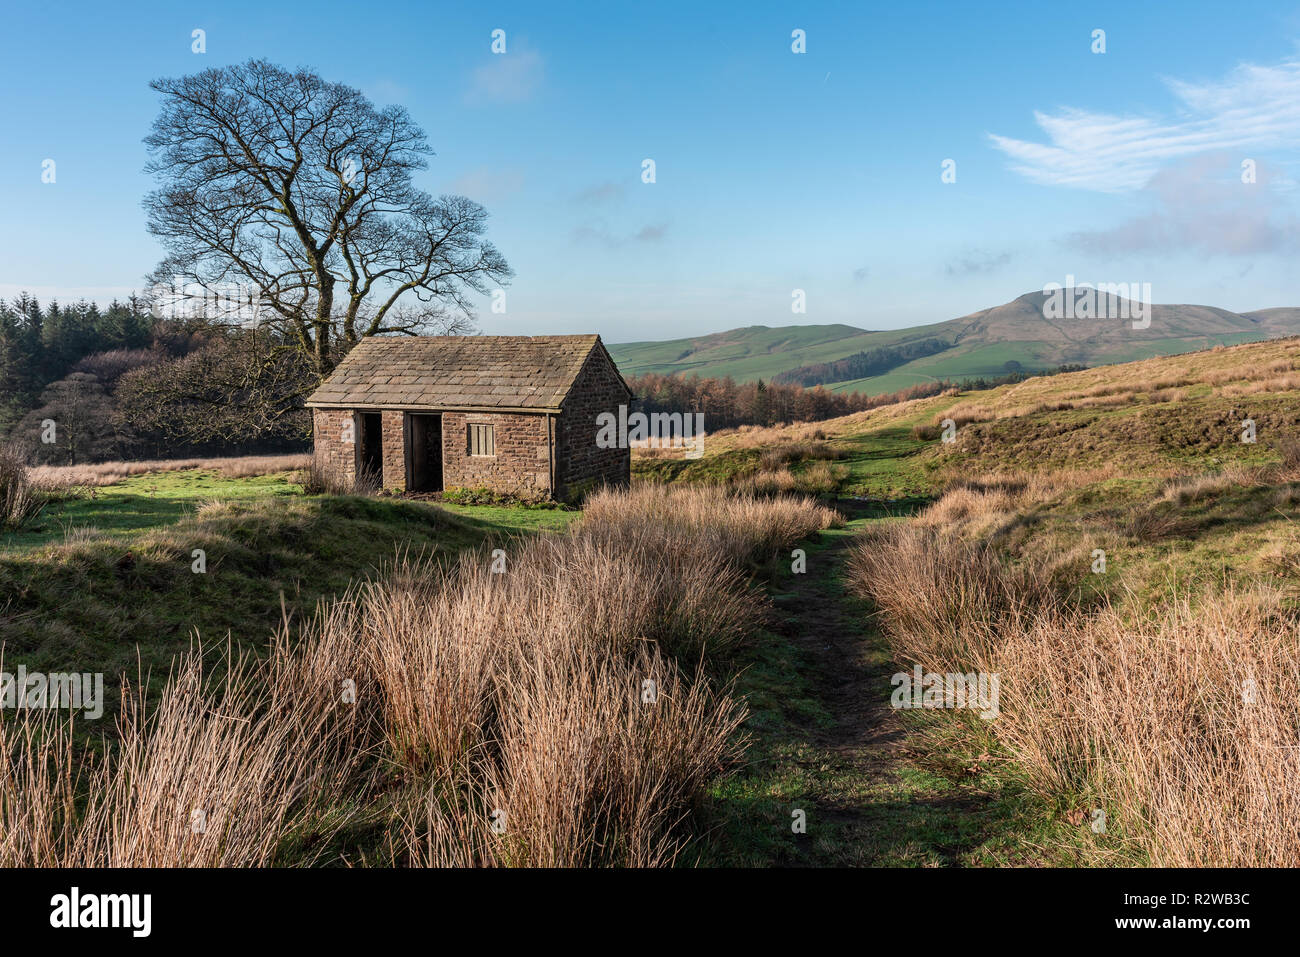 View to a distant Shutlingsloe hill in Cheshire, Peak District National Park. Stock Photo